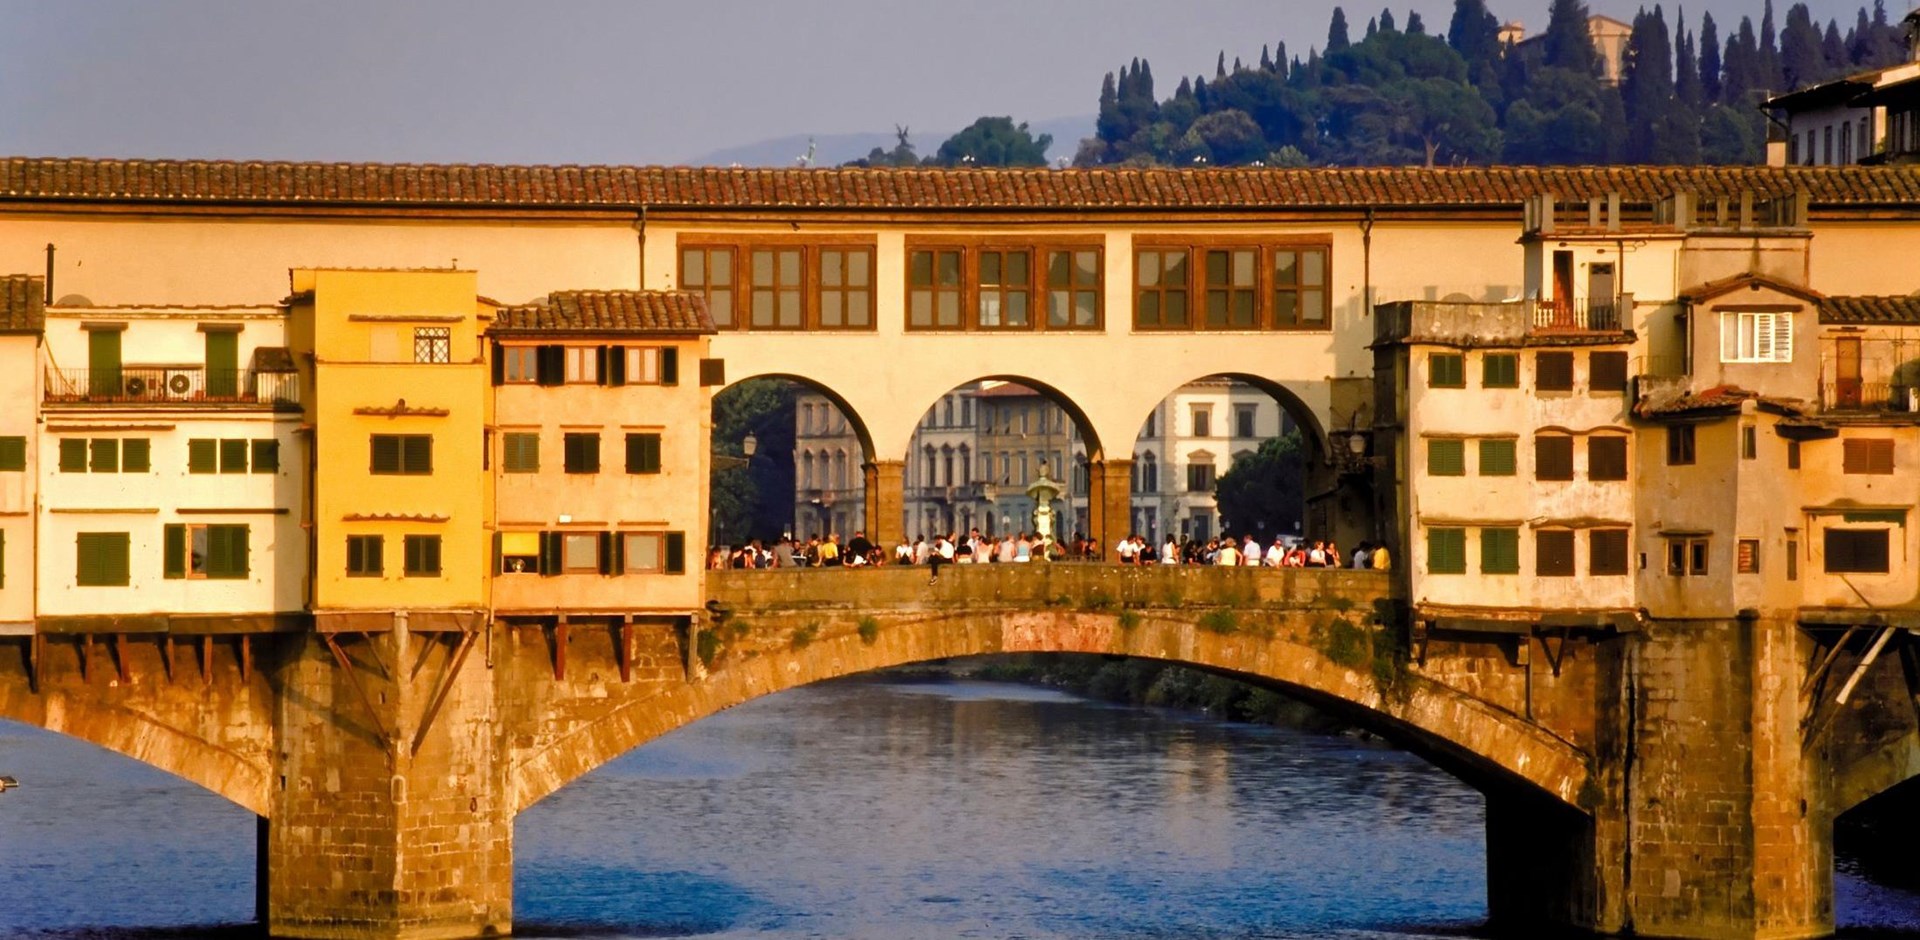 Ponte Vecchio over a body of water with a city in the background